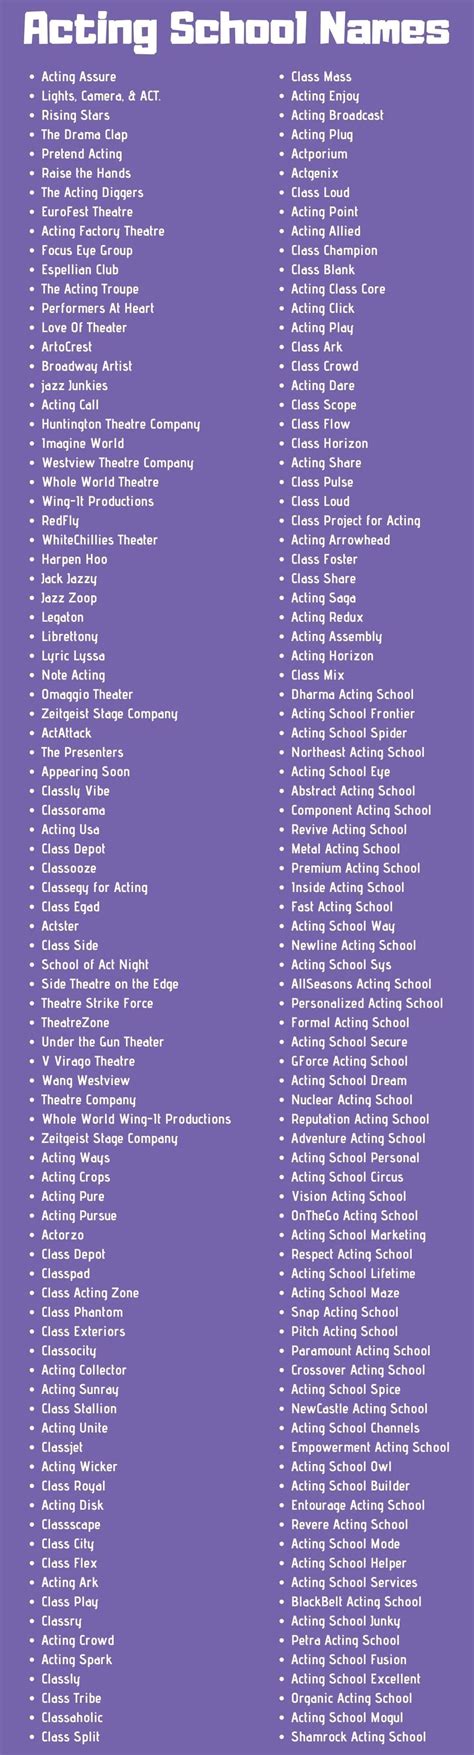 In This Article You Will Find Acting School Names And Ideas To Inspire